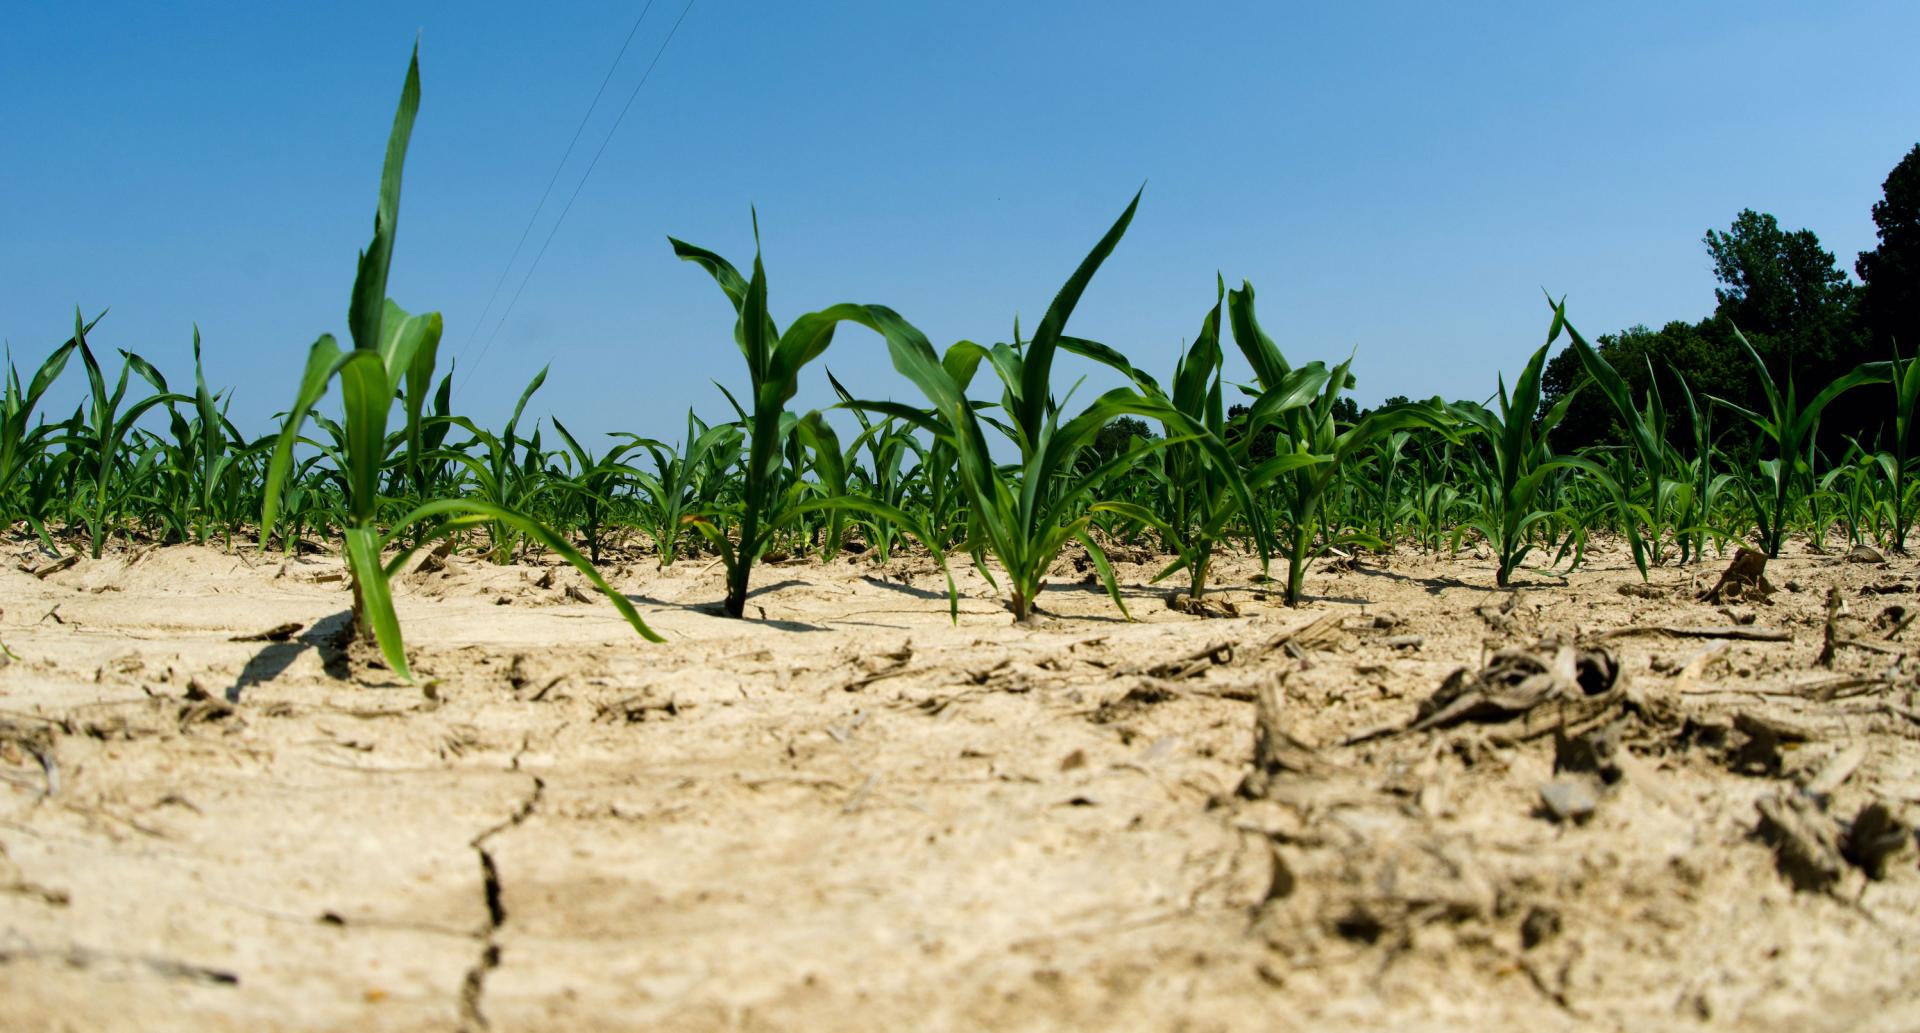 Dry ground and drought conditions in an Illinois cornfield